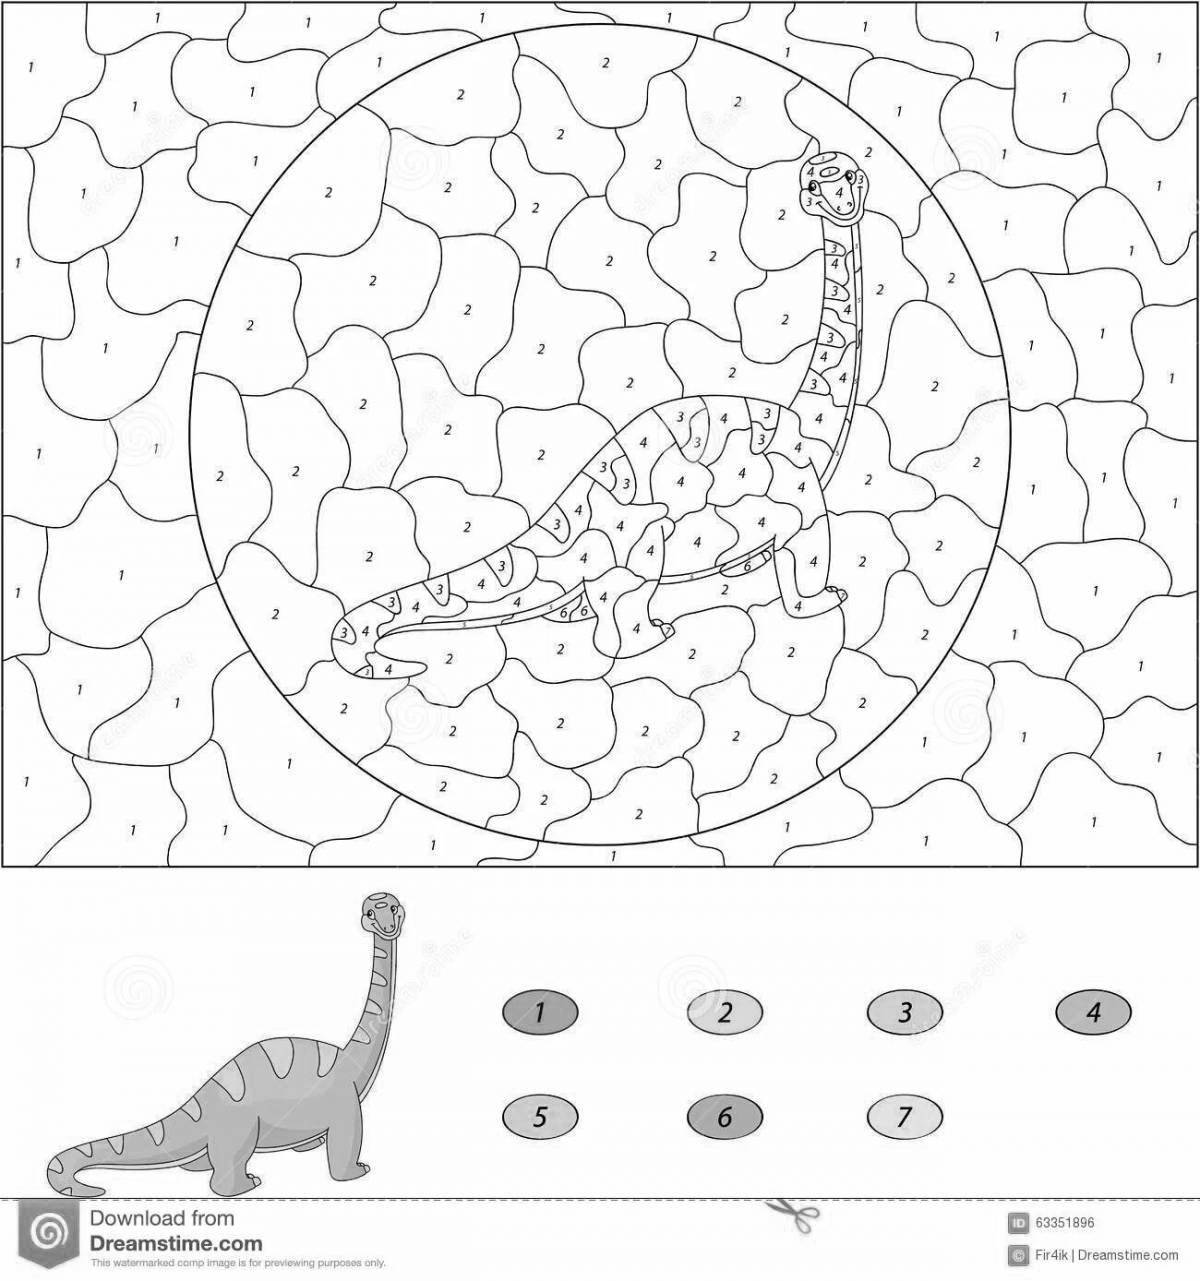 Exquisite dinosaur coloring by numbers